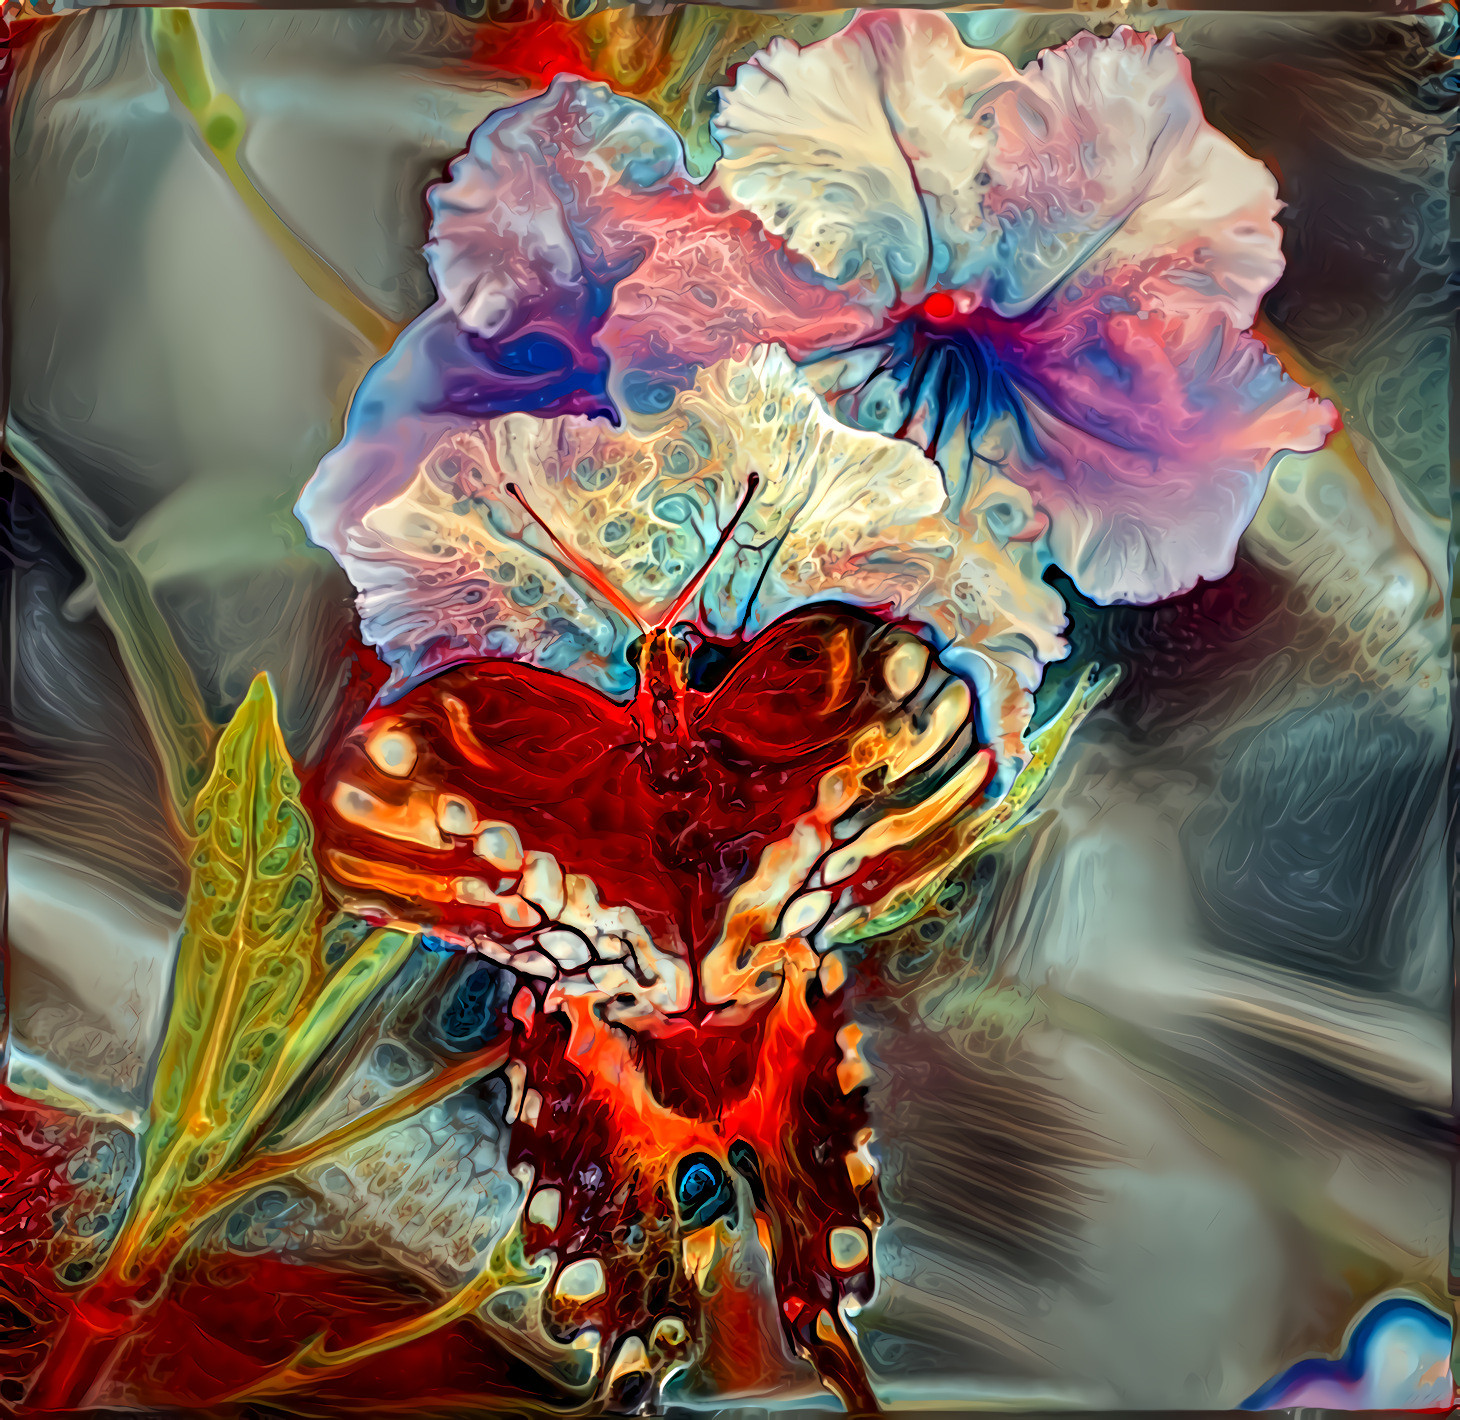 Butterfly and Flowers